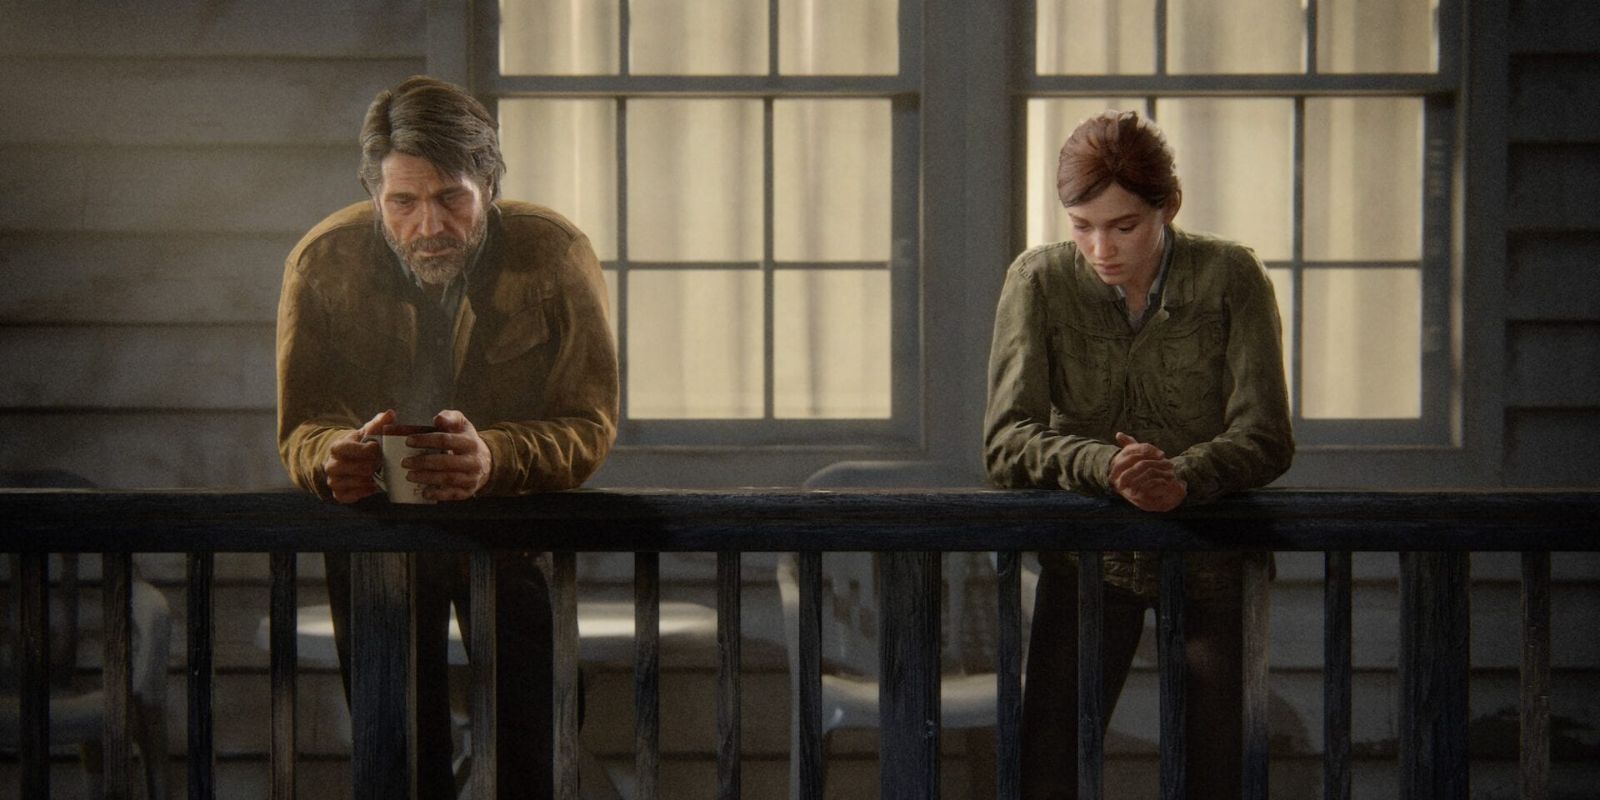 Joel and Ellie share a drink on Joel's porch in The Last of Us Part II